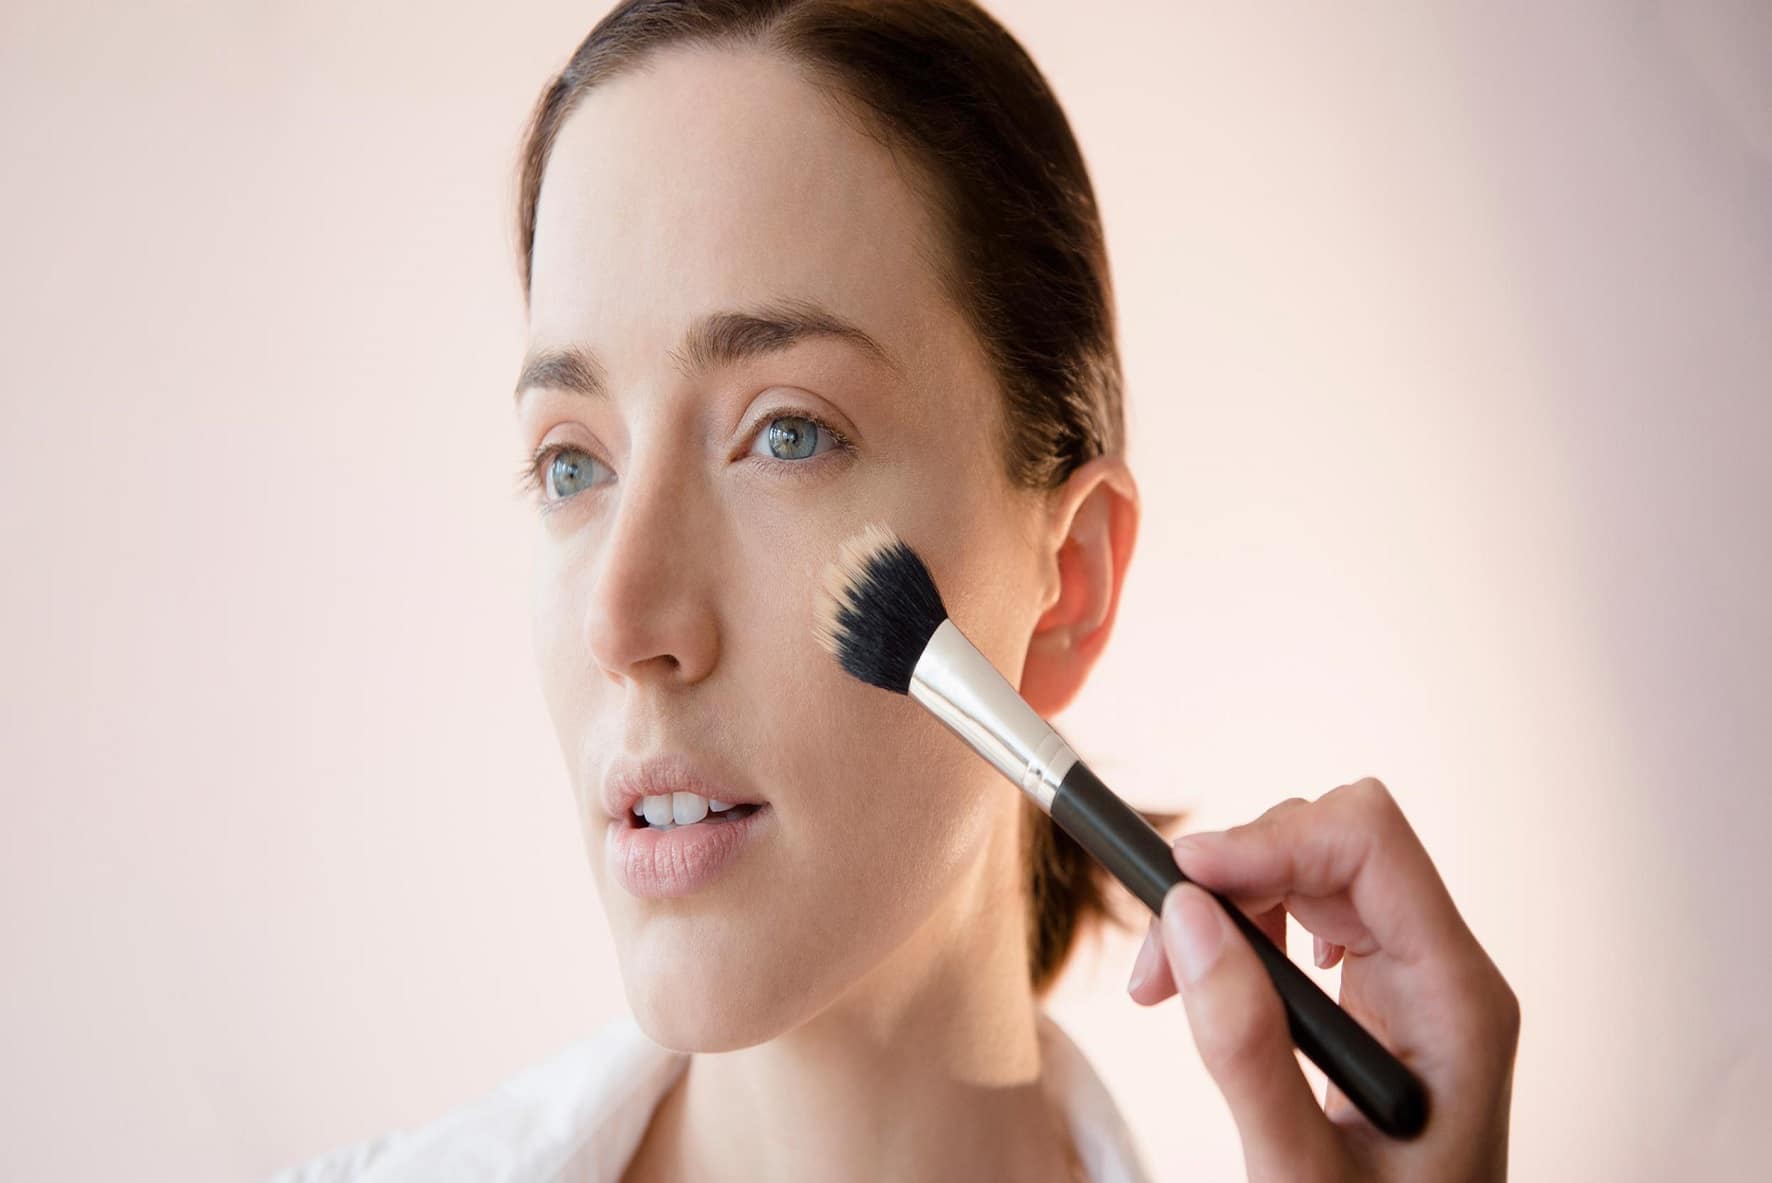 A makeup pro's 11 tips for creating a natural